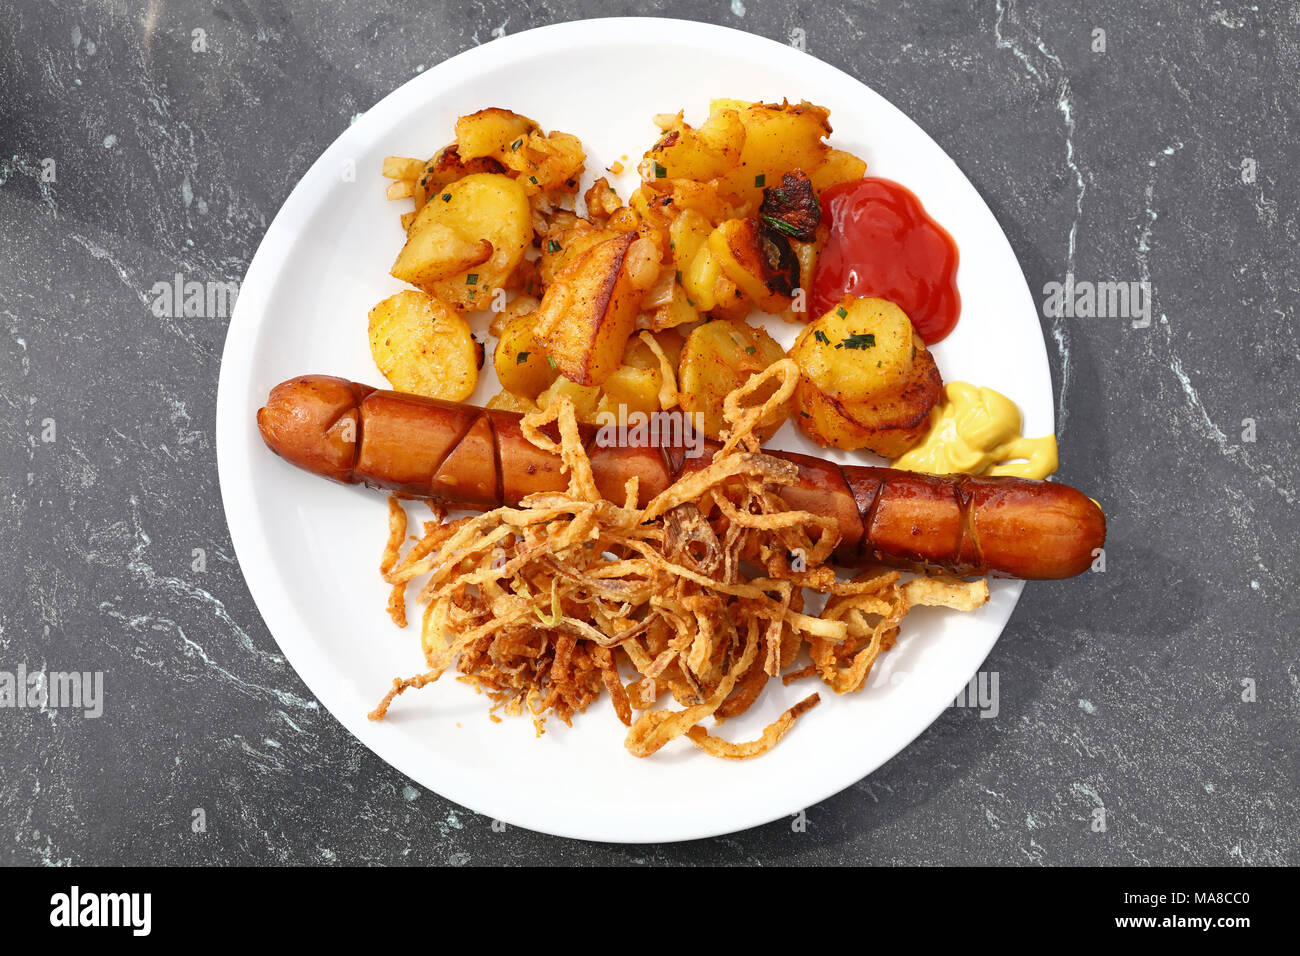 Close up portion of one big grilled sausage with homemade roasted potato, fried onion rings, ketchup and mustard on white plate over grey table, eleva Stock Photo